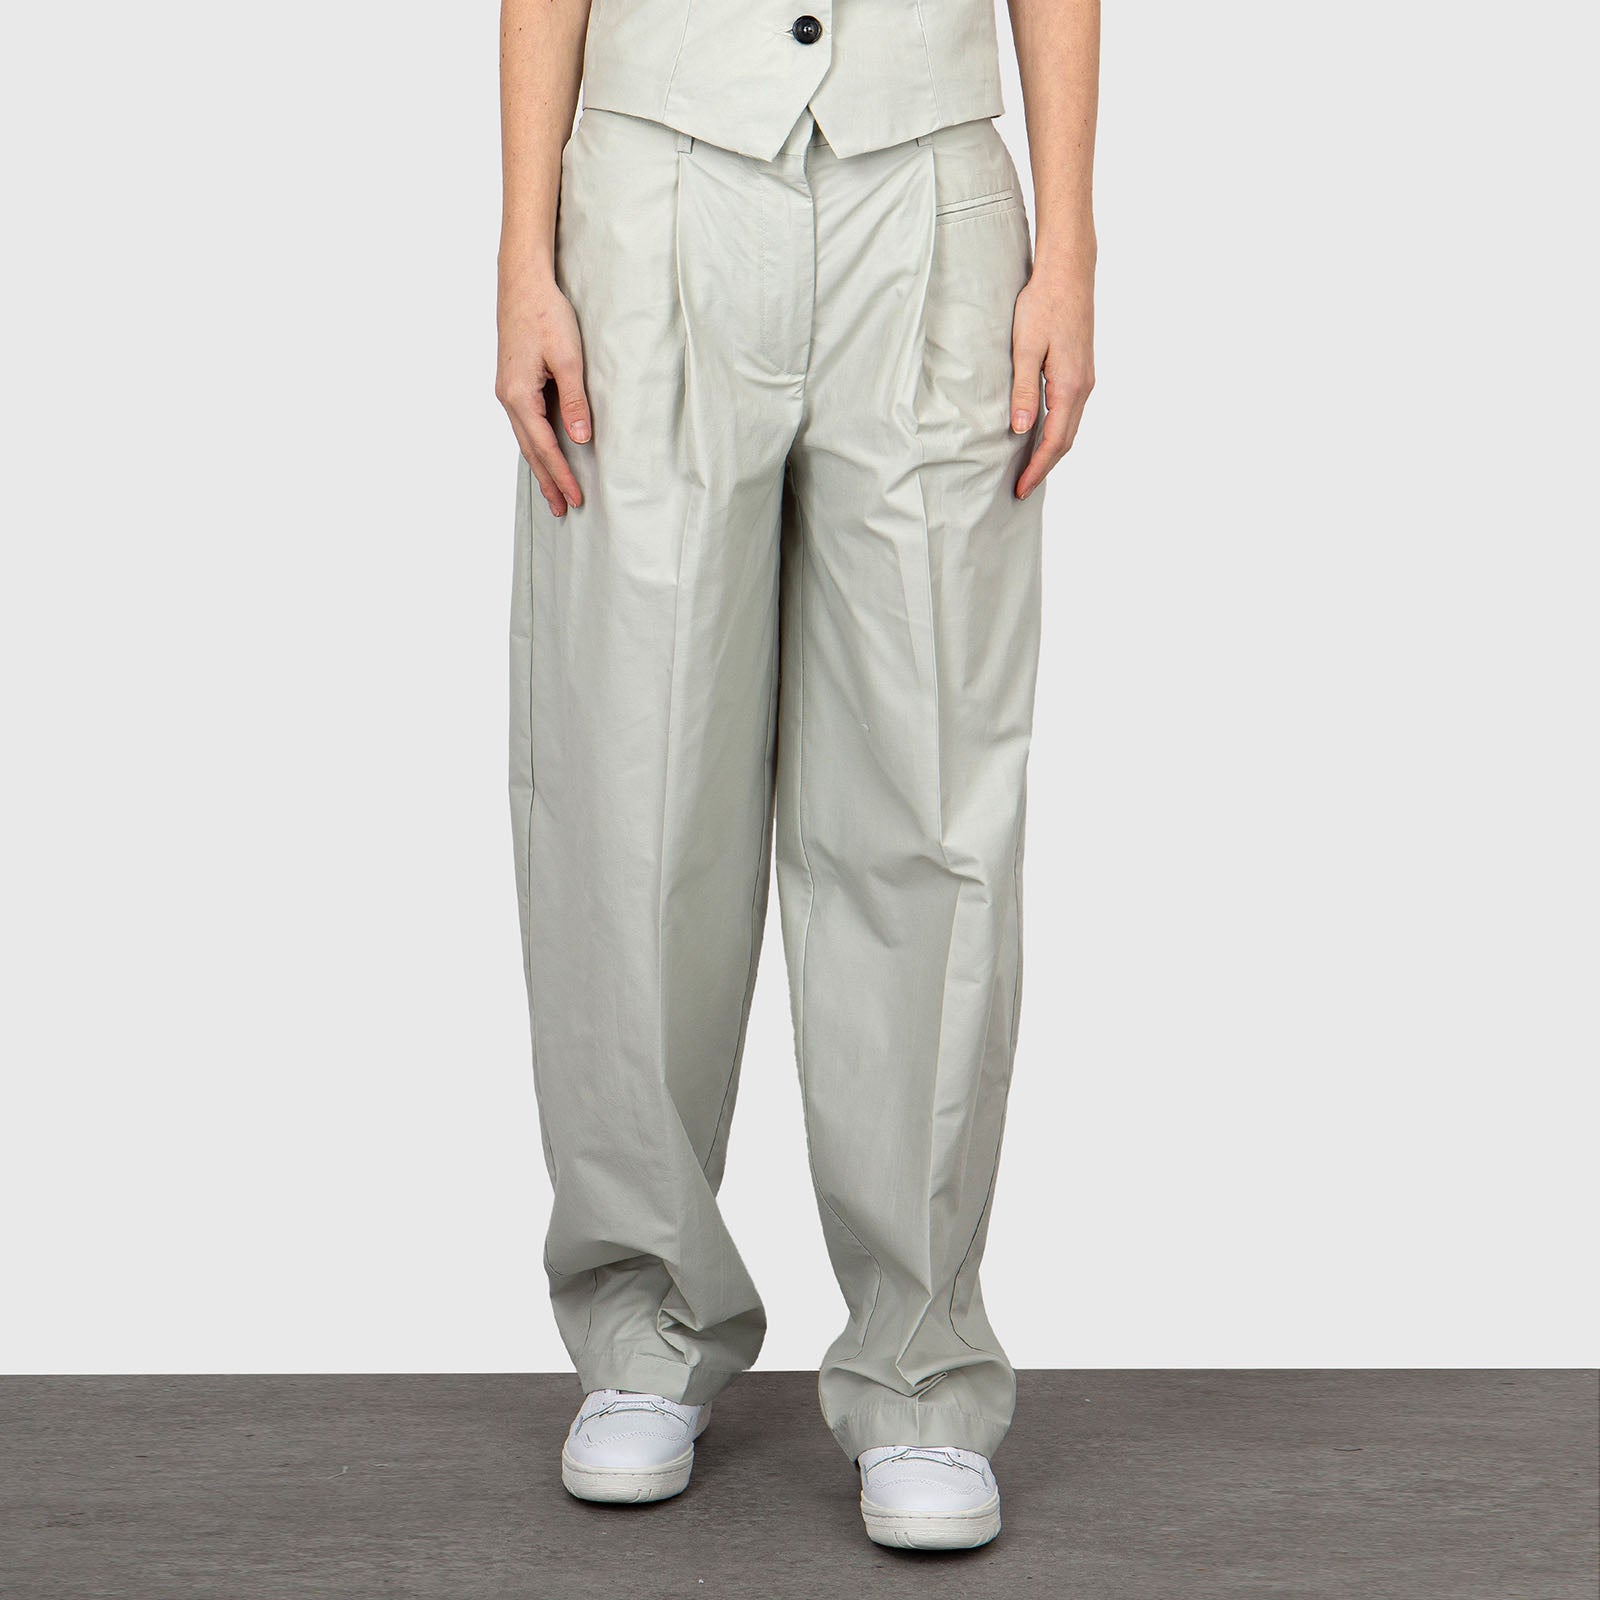 Grifoni Banana Trousers in Ice Cotton - 7